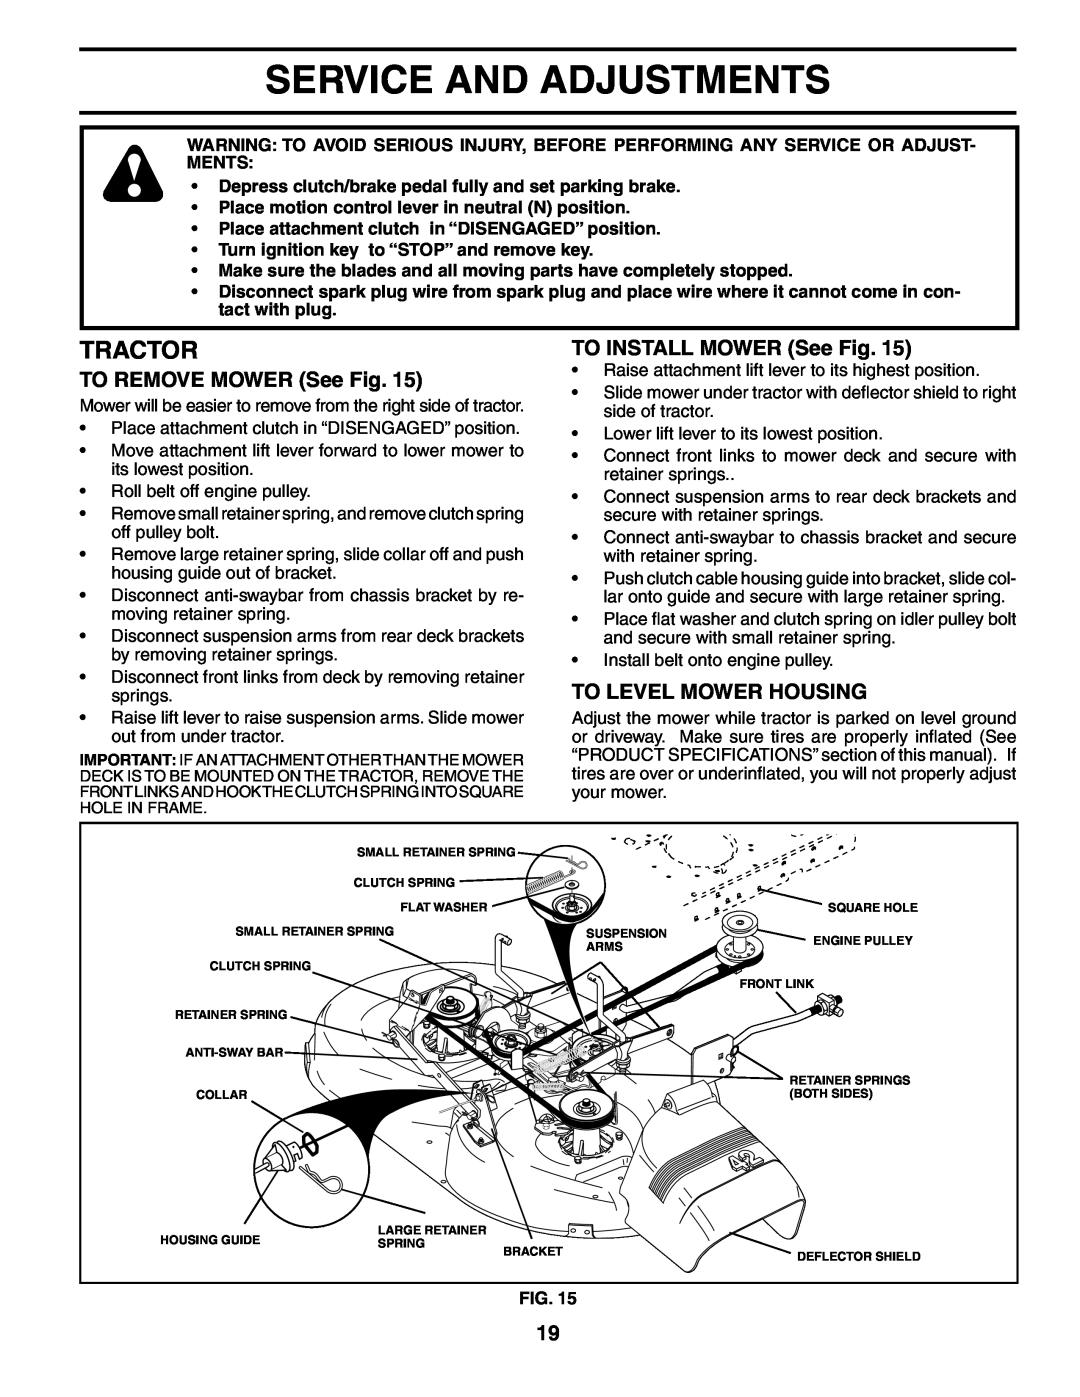 Husqvarna LTH18542 Service And Adjustments, TO REMOVE MOWER See Fig, TO INSTALL MOWER See Fig, To Level Mower Housing 